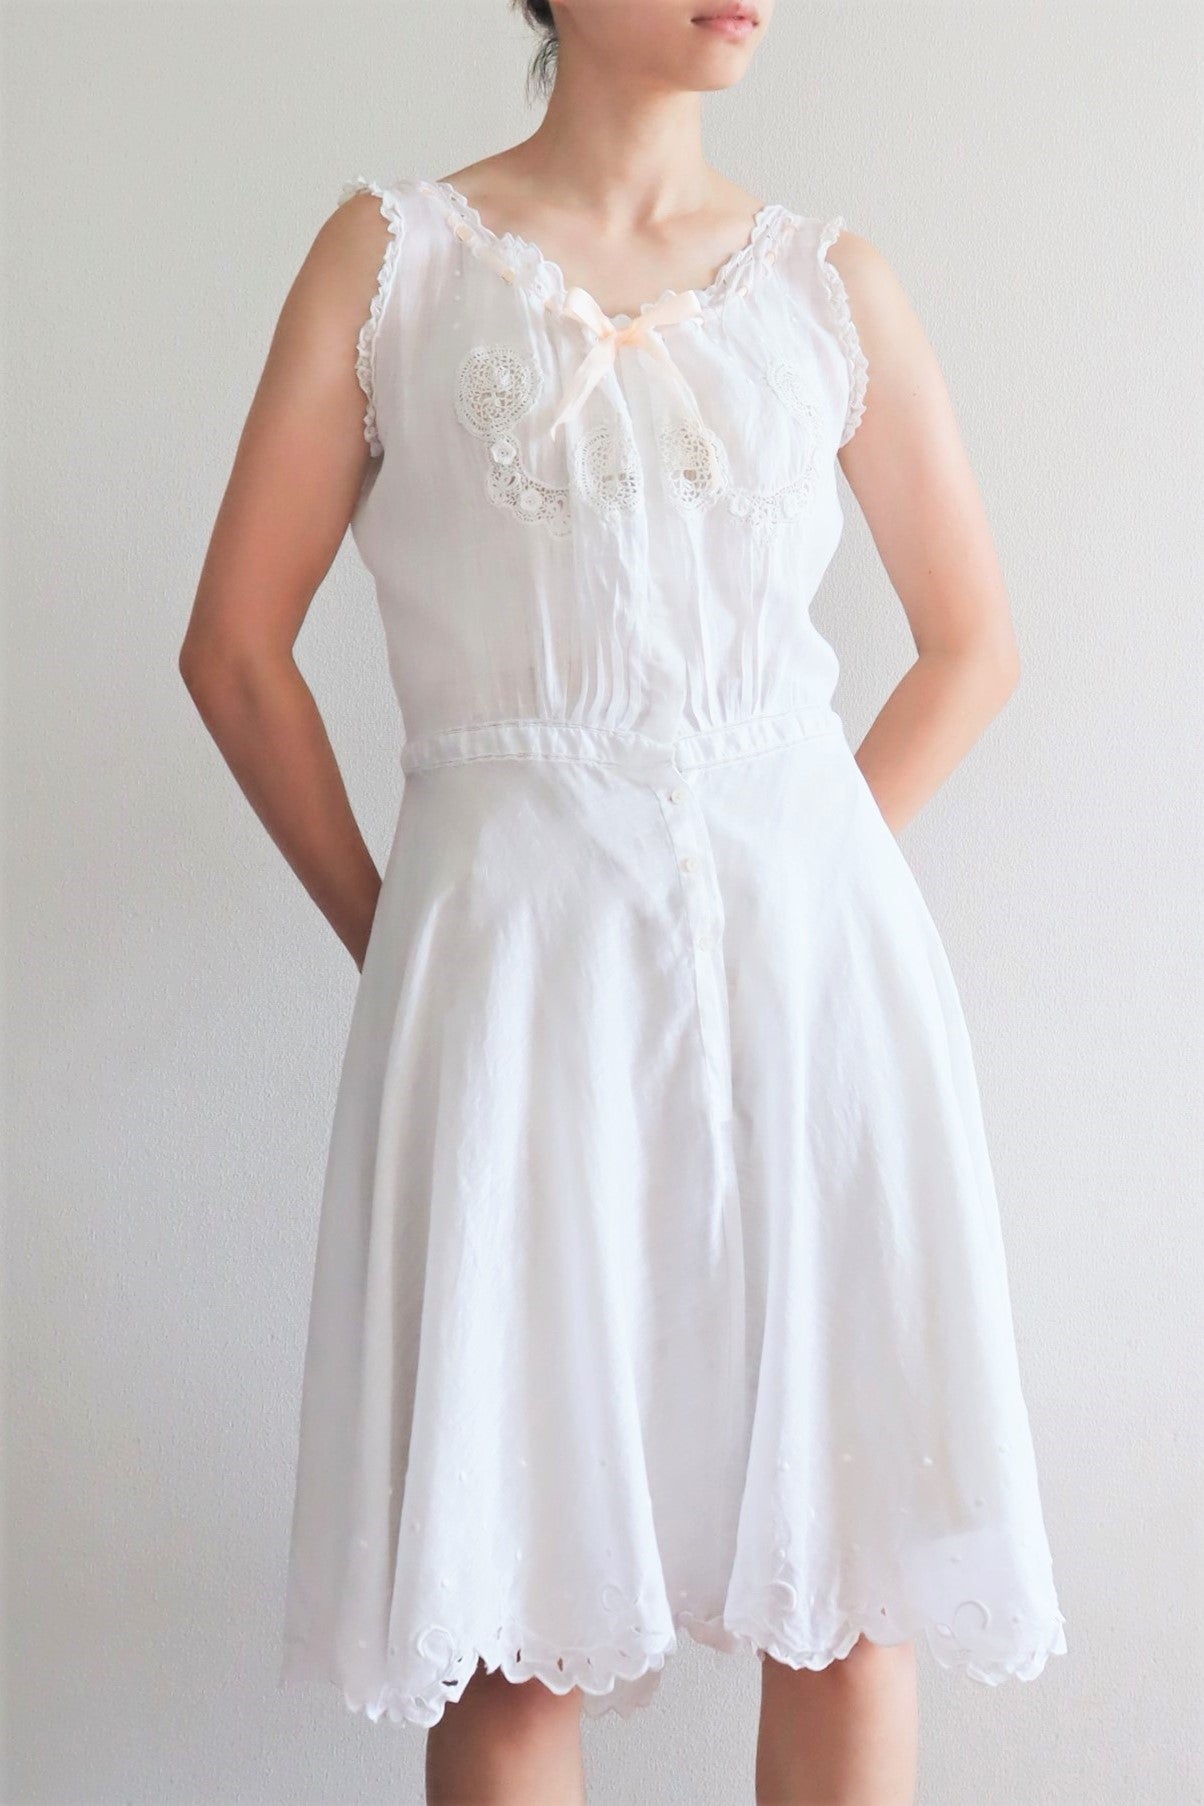 1900s Edwardian Hand Embroidered White Lawn Cotton Romper – makky